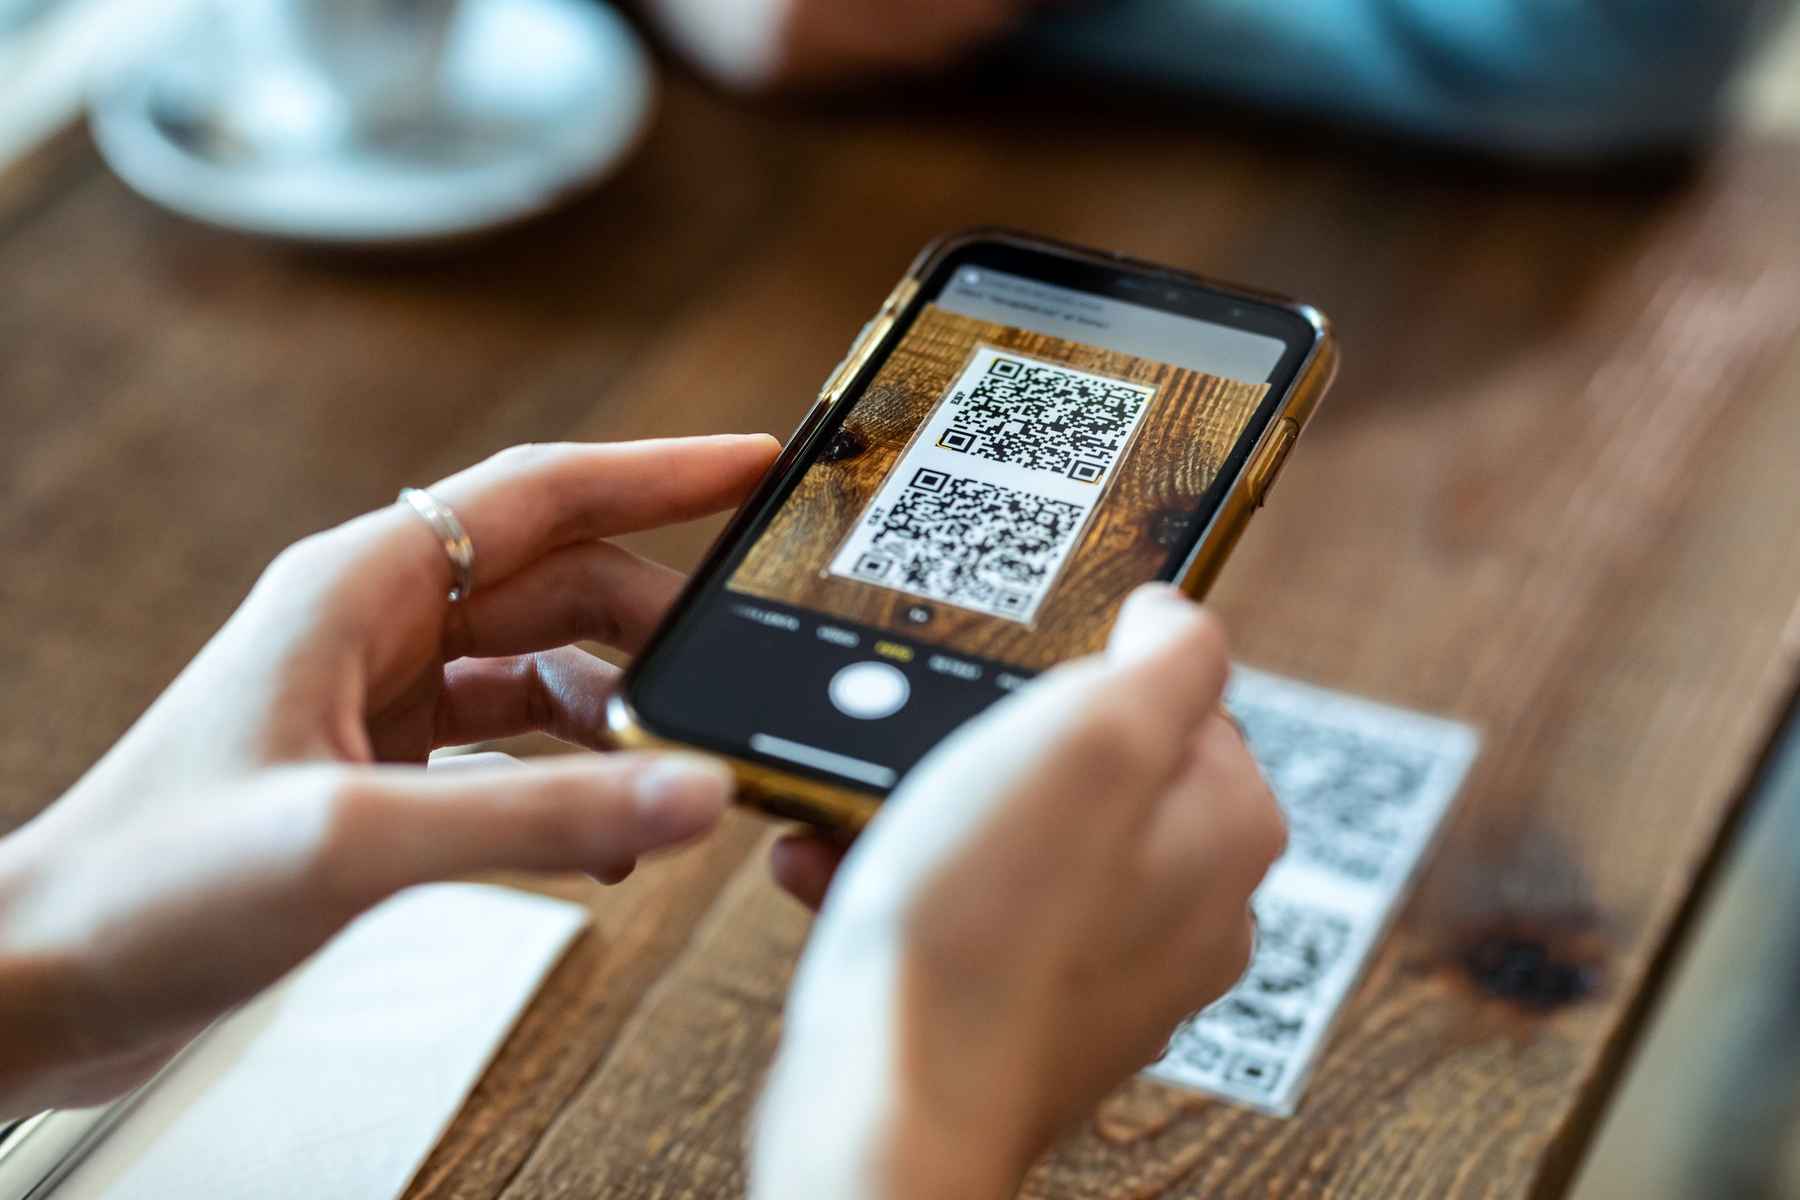 Close up on woman's hands using her phone to scan a QR code at a restaurant table for the menu.